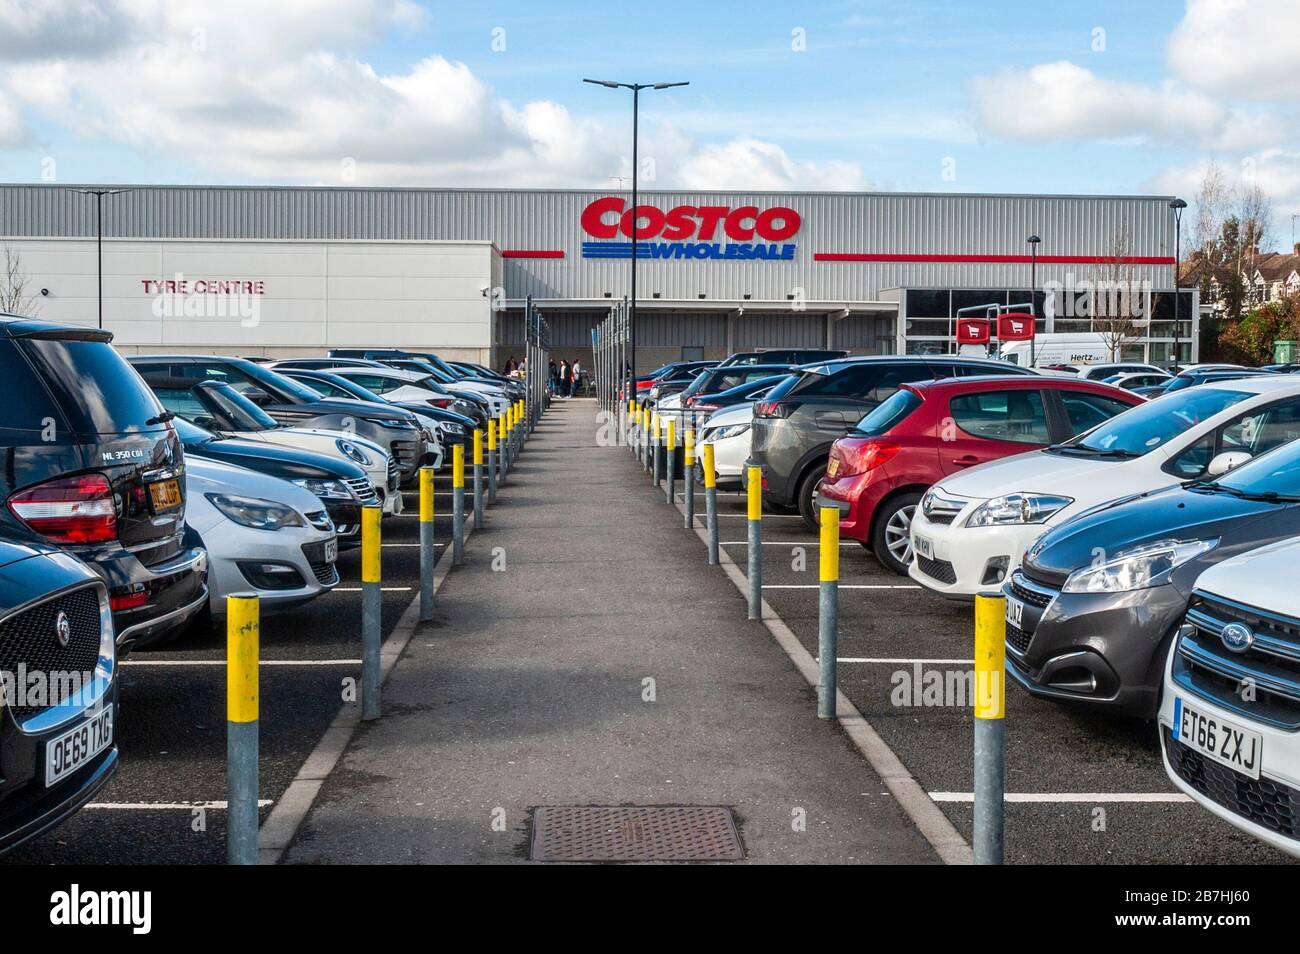 Coventry, West Midlands, UK. 16th Mar, 2020. The Costco wholesaler car park was packed with cars today amidst major panic buying due to the Coronavirus. Credit: Andy Gibson/Alamy Live News Stock Photo